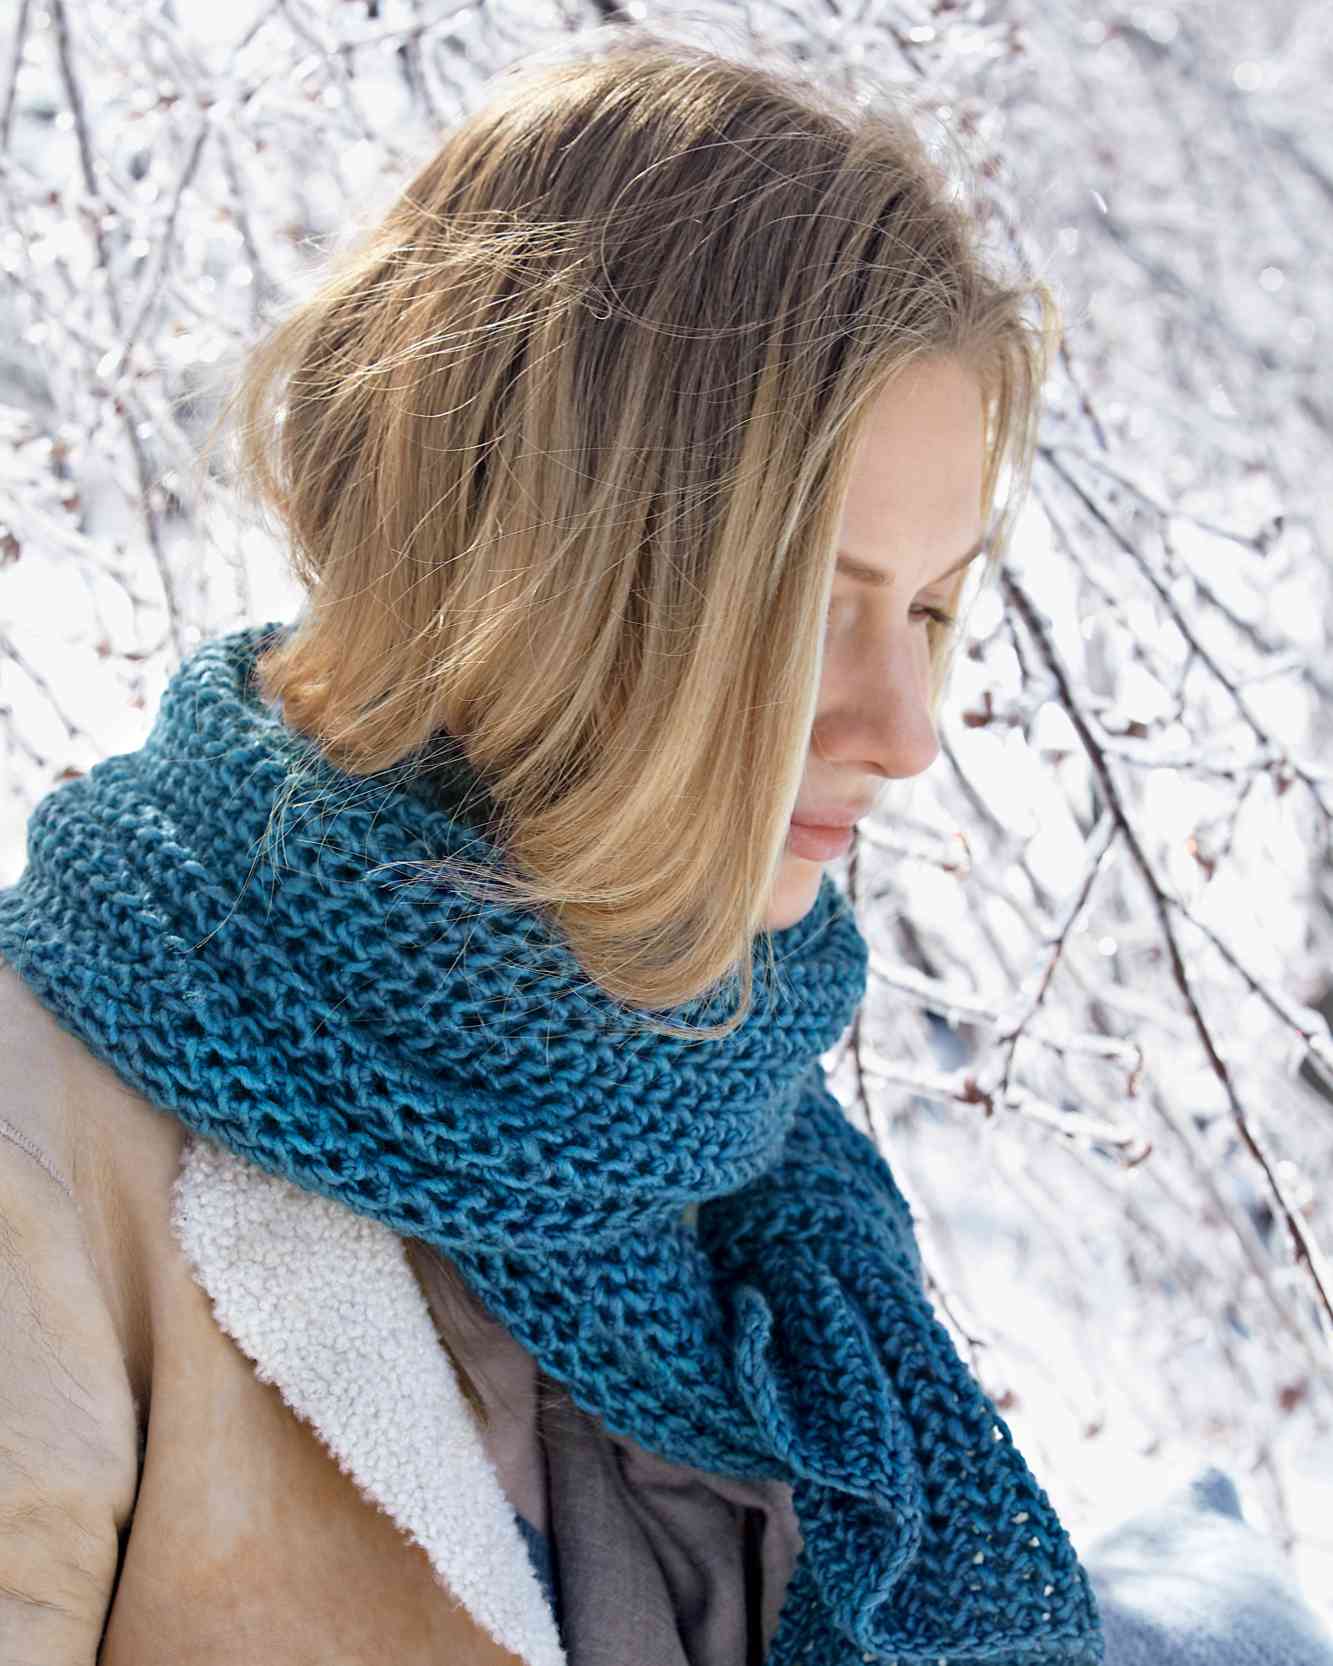 long scarf Handmade Knitted Lengthy Scarf high quality wool woolen scarf winter scarf Accessories Scarves & Wraps Scarves warm scarf handknitted 